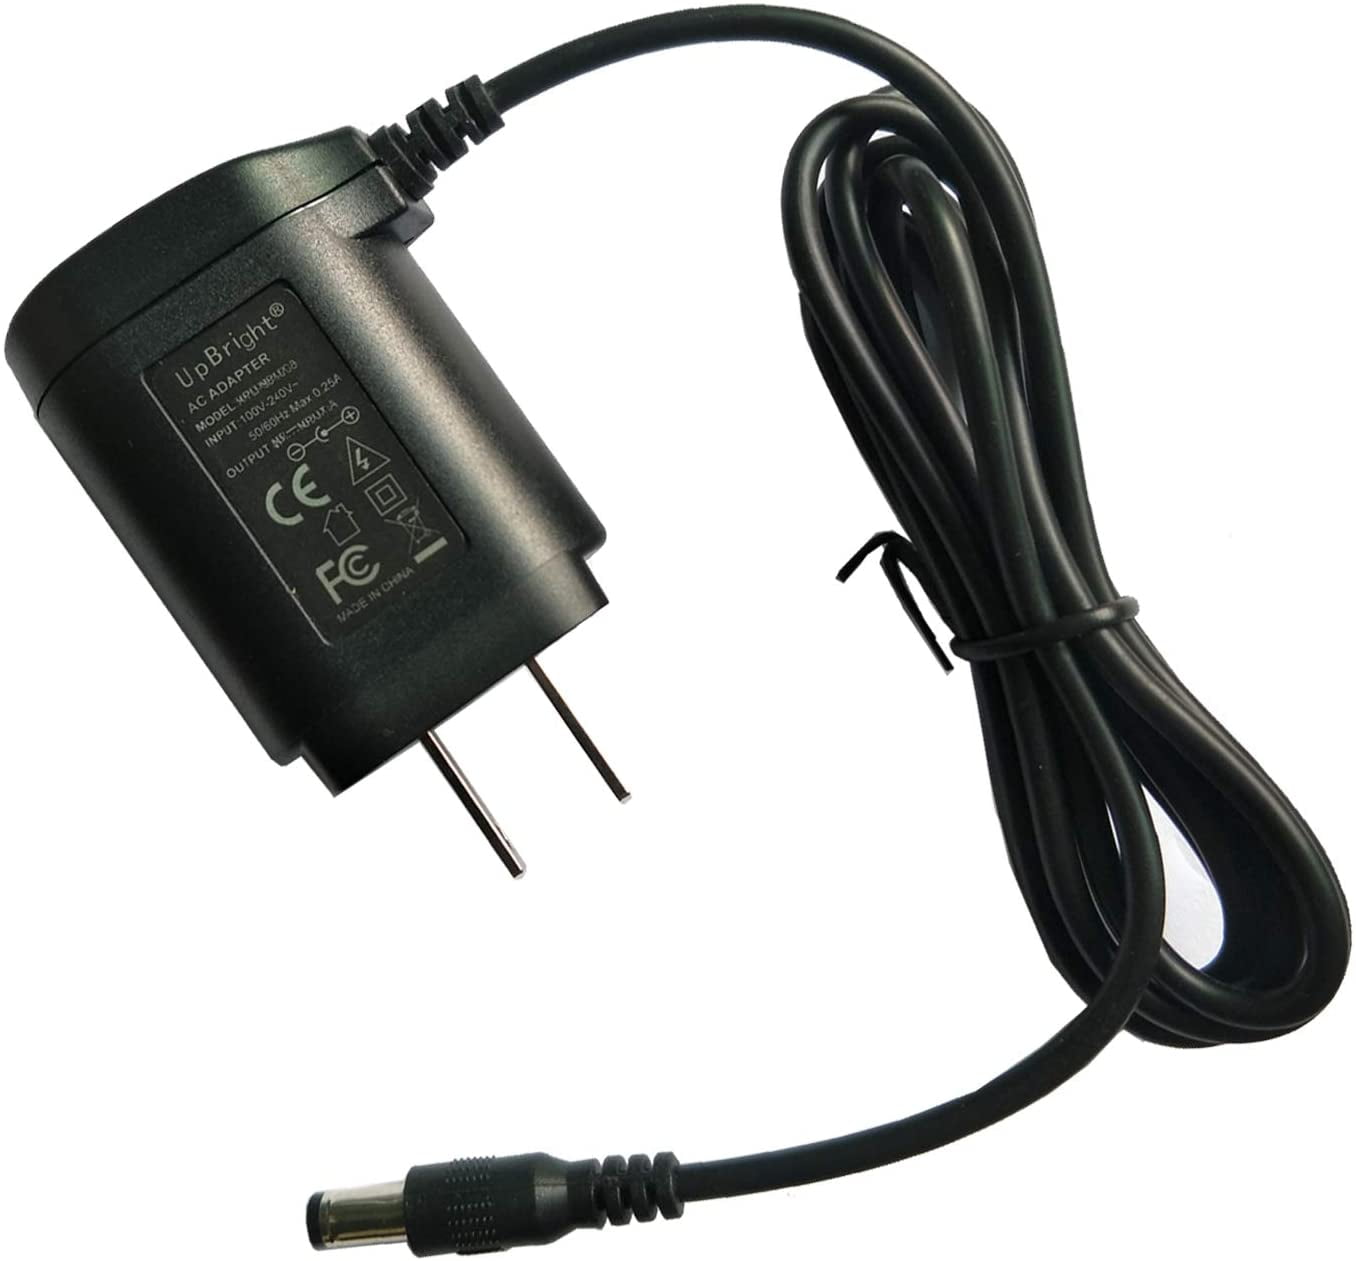 conjunción mezcla frente UPBRIGHT Adapter For Philips Nike ACT500 ACT500/05 ACT500/11 ACT500/17  Portable Sports Audio CD Player Power Supply Cord Cable Battery Charger -  Walmart.com